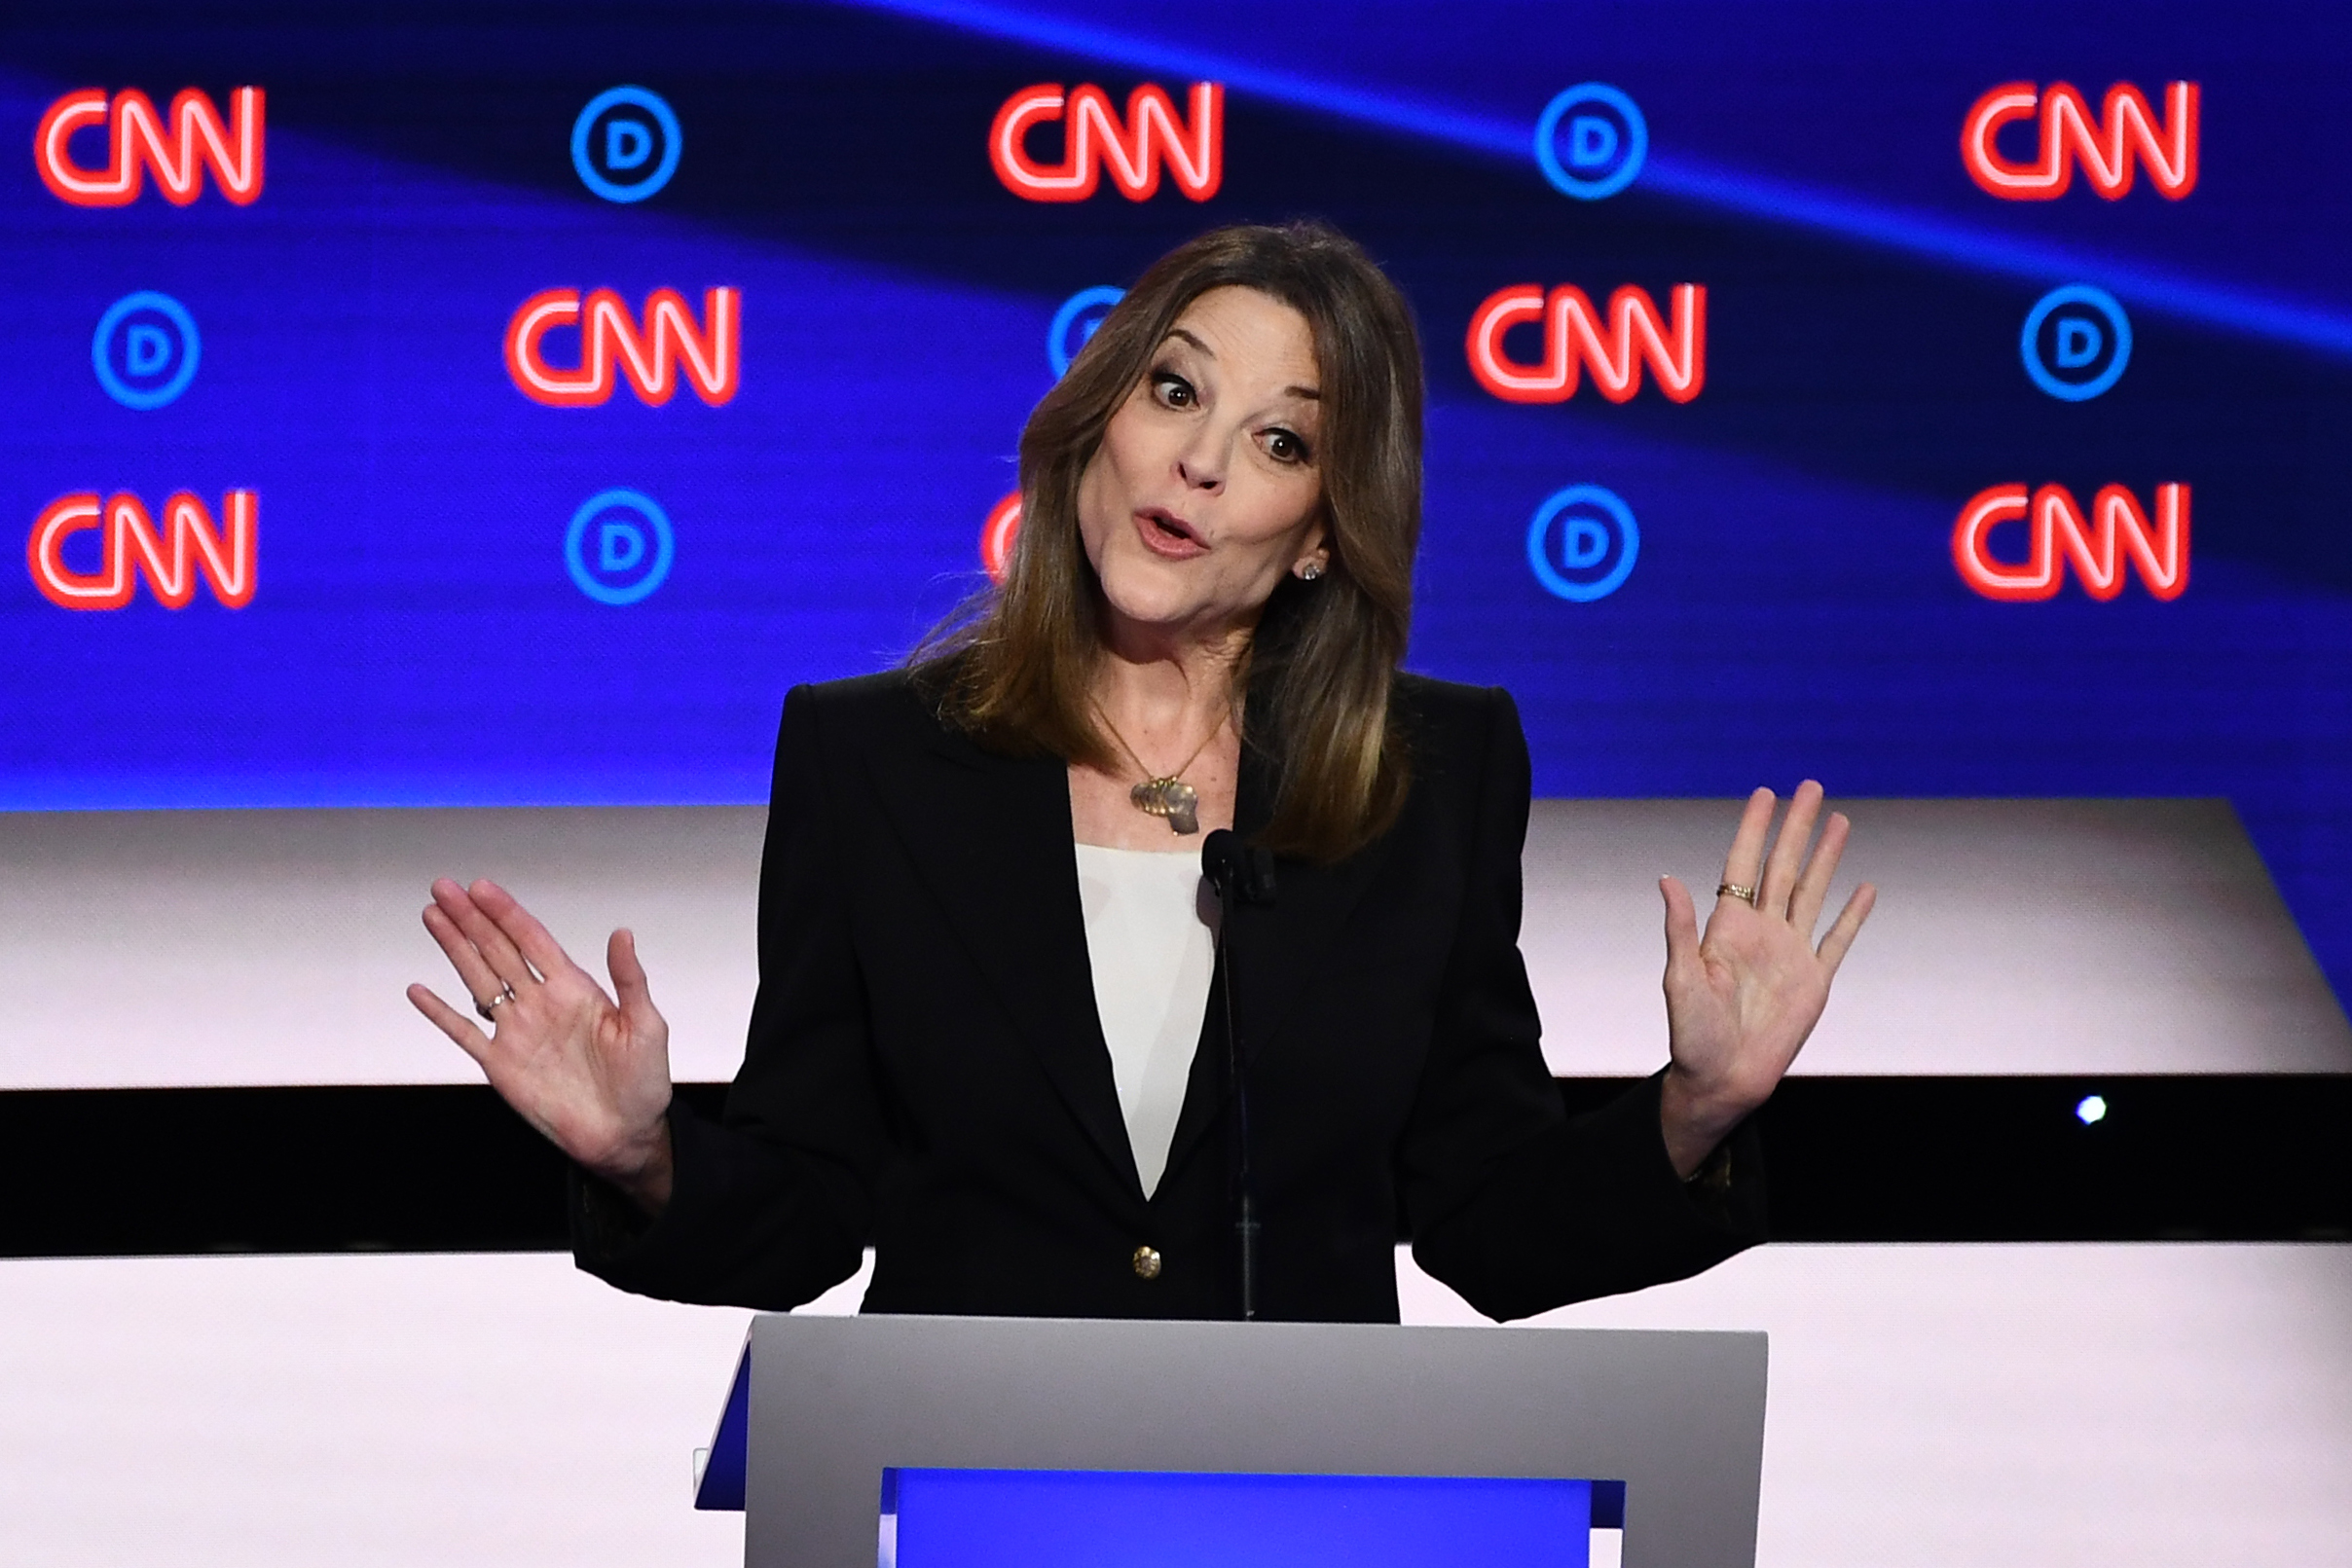 Democratic presidential hopeful US author and writer Marianne Williamson speaks during the first round of the second Democratic primary debate of the 2020 presidential campaign season at the Fox Theatre in Detroit, Michigan on July 30, 2019. (BRENDAN SMIALOWSKI&mdash;AFP/Getty Images)